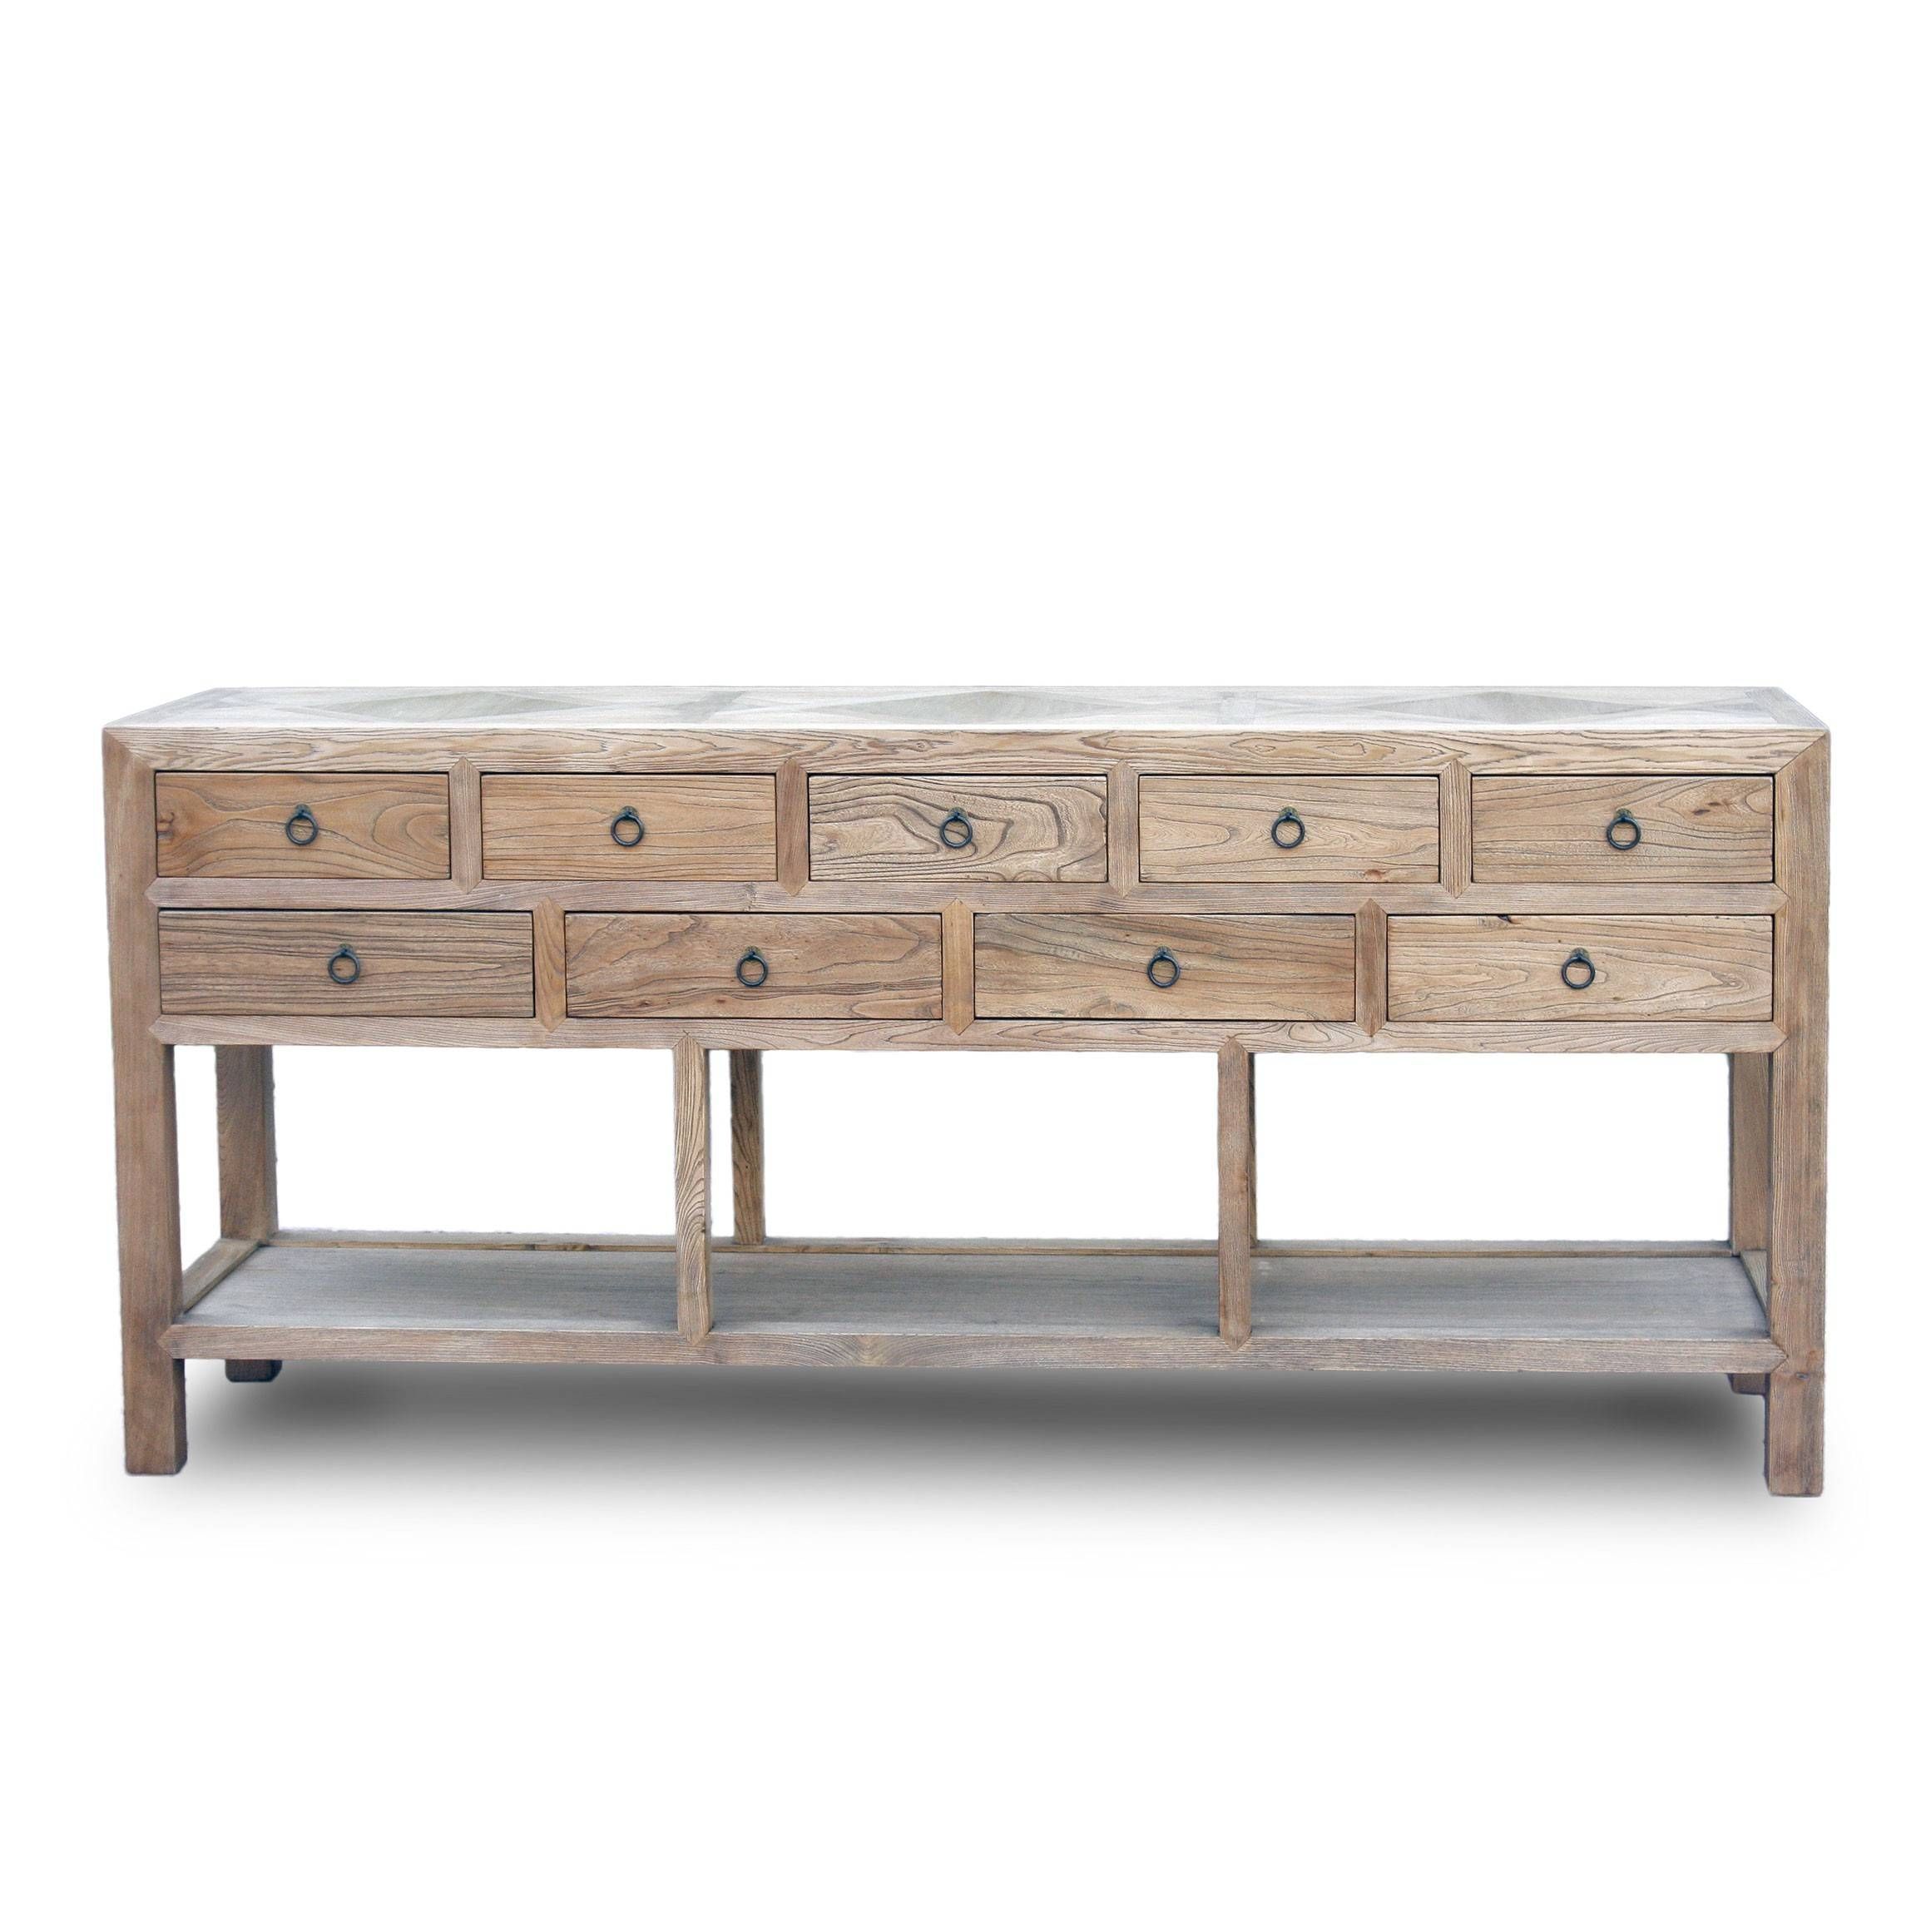 Buffets, Sideboard, Credenzas, Servers And Hutches – Acf China Inside Most Up To Date Buffet Console Sideboards (View 8 of 15)